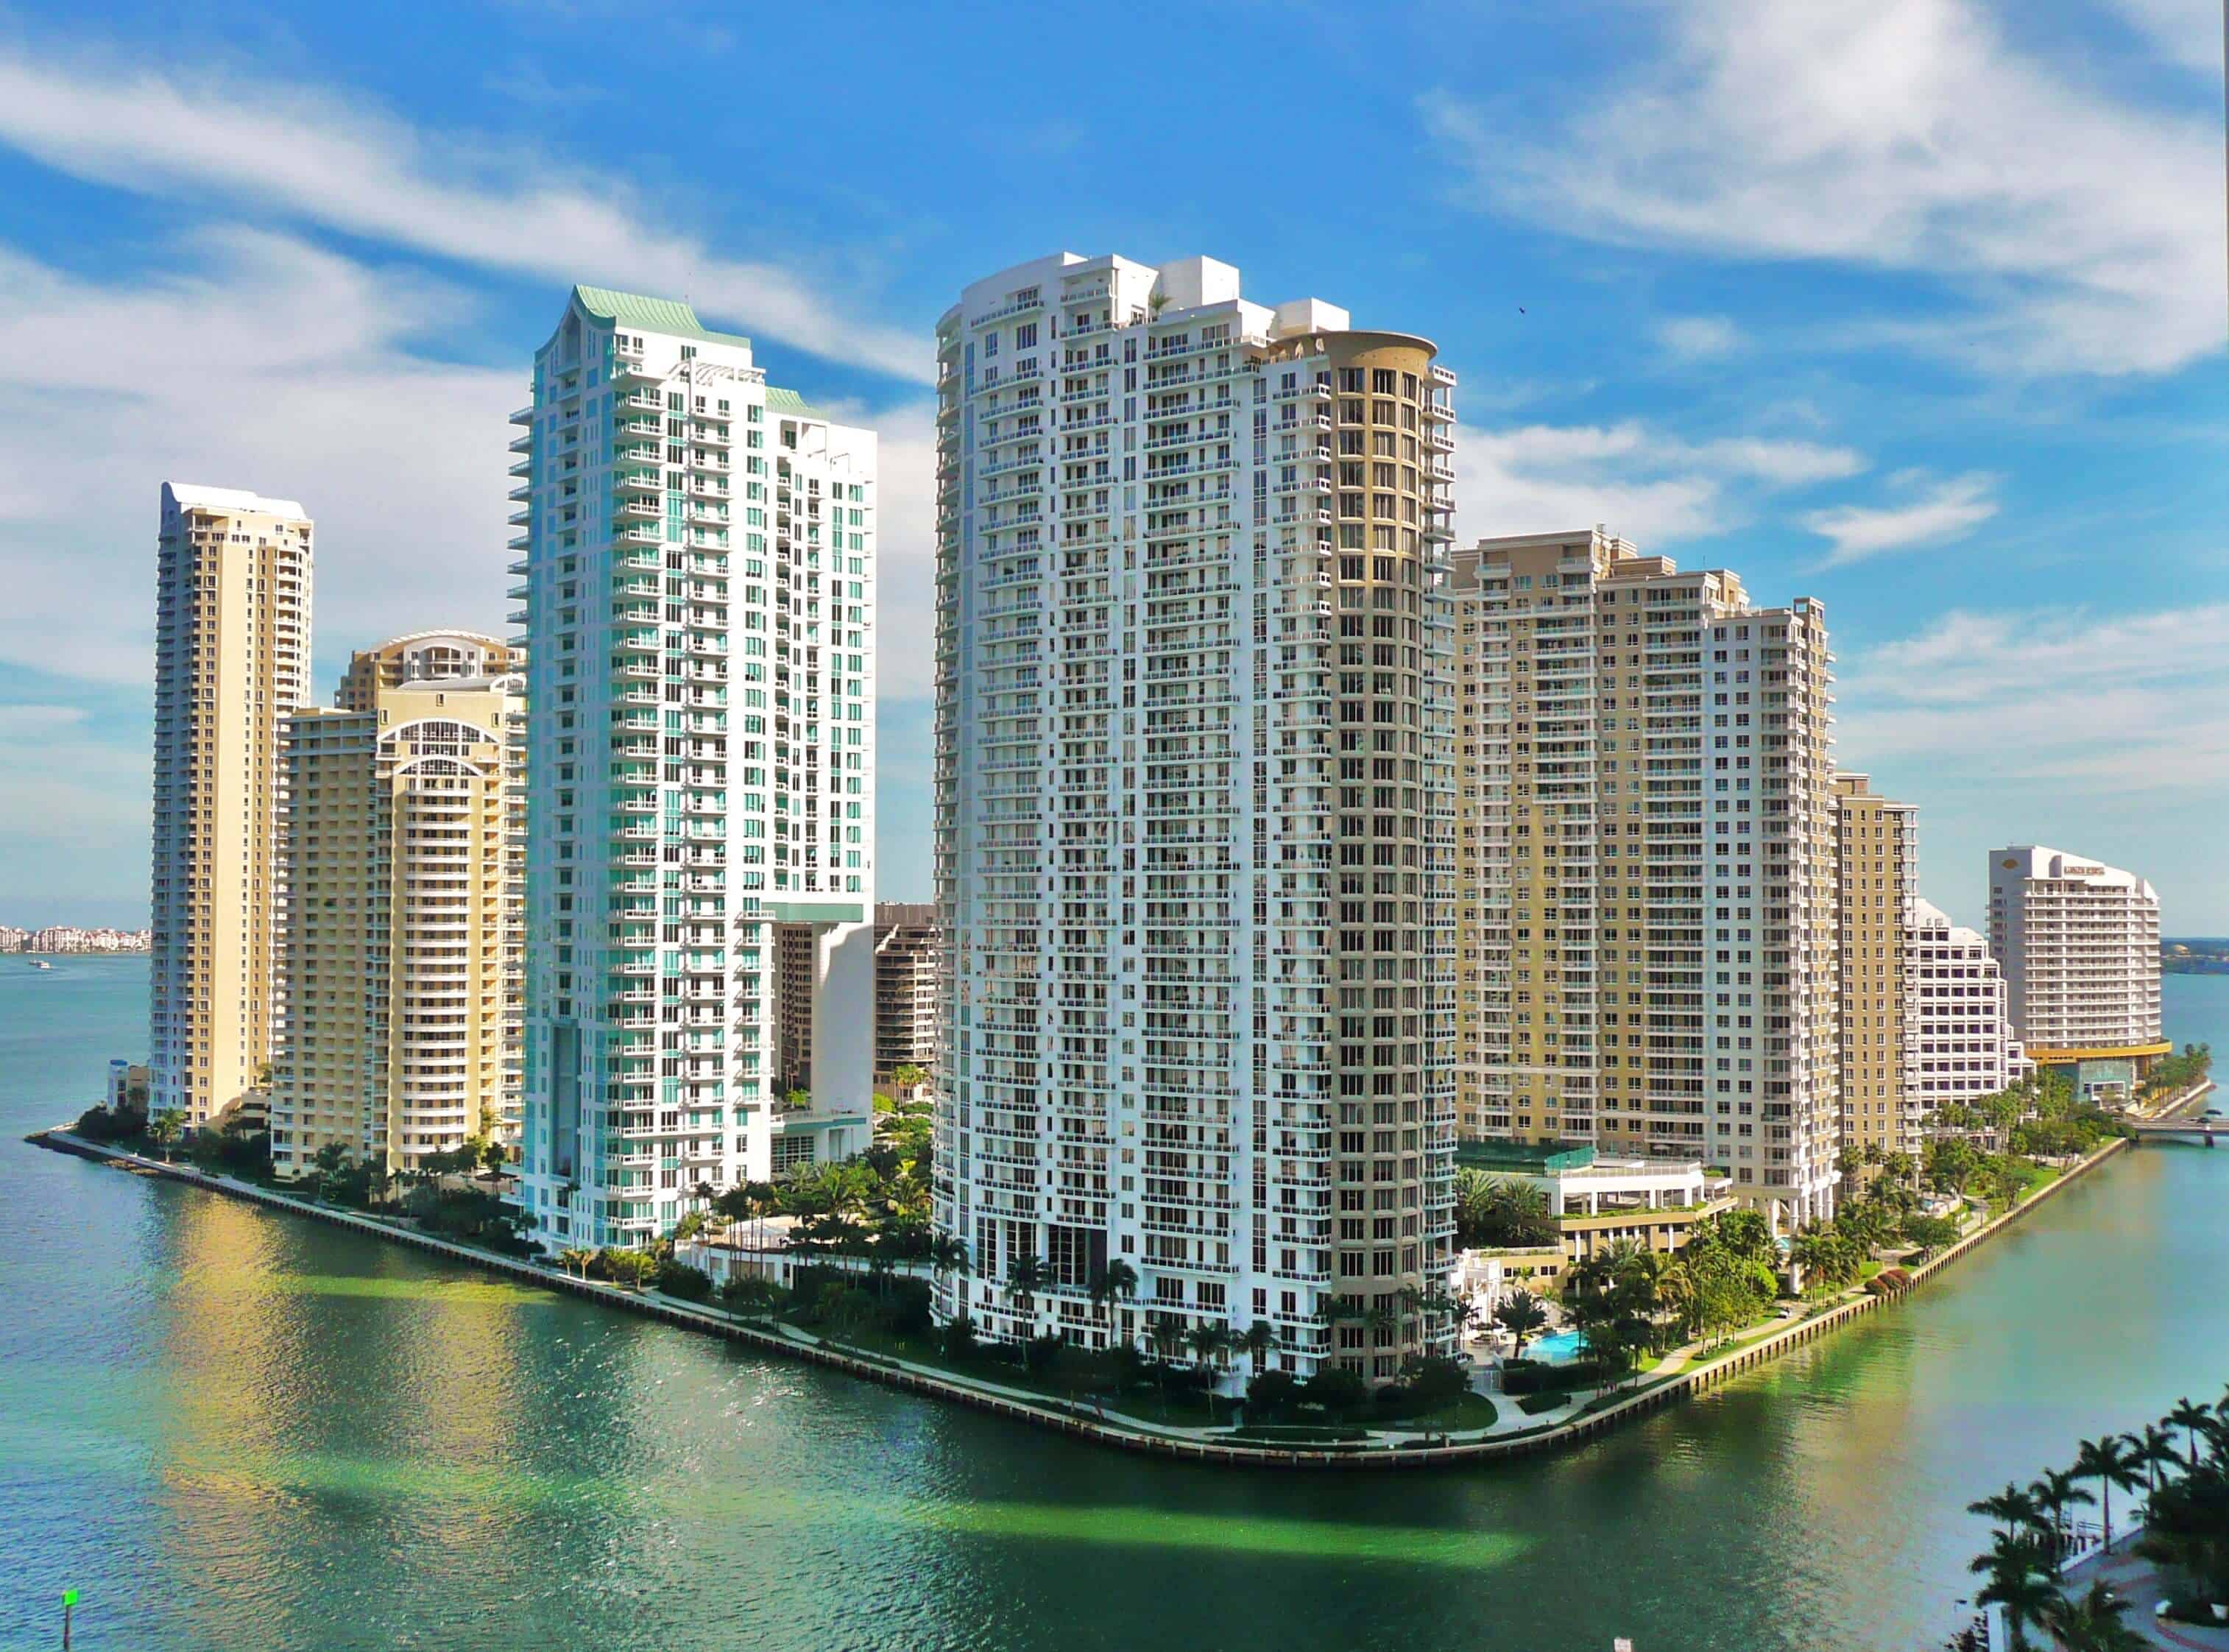 Buying a condo in Miami: Should you purchase a tax deed?